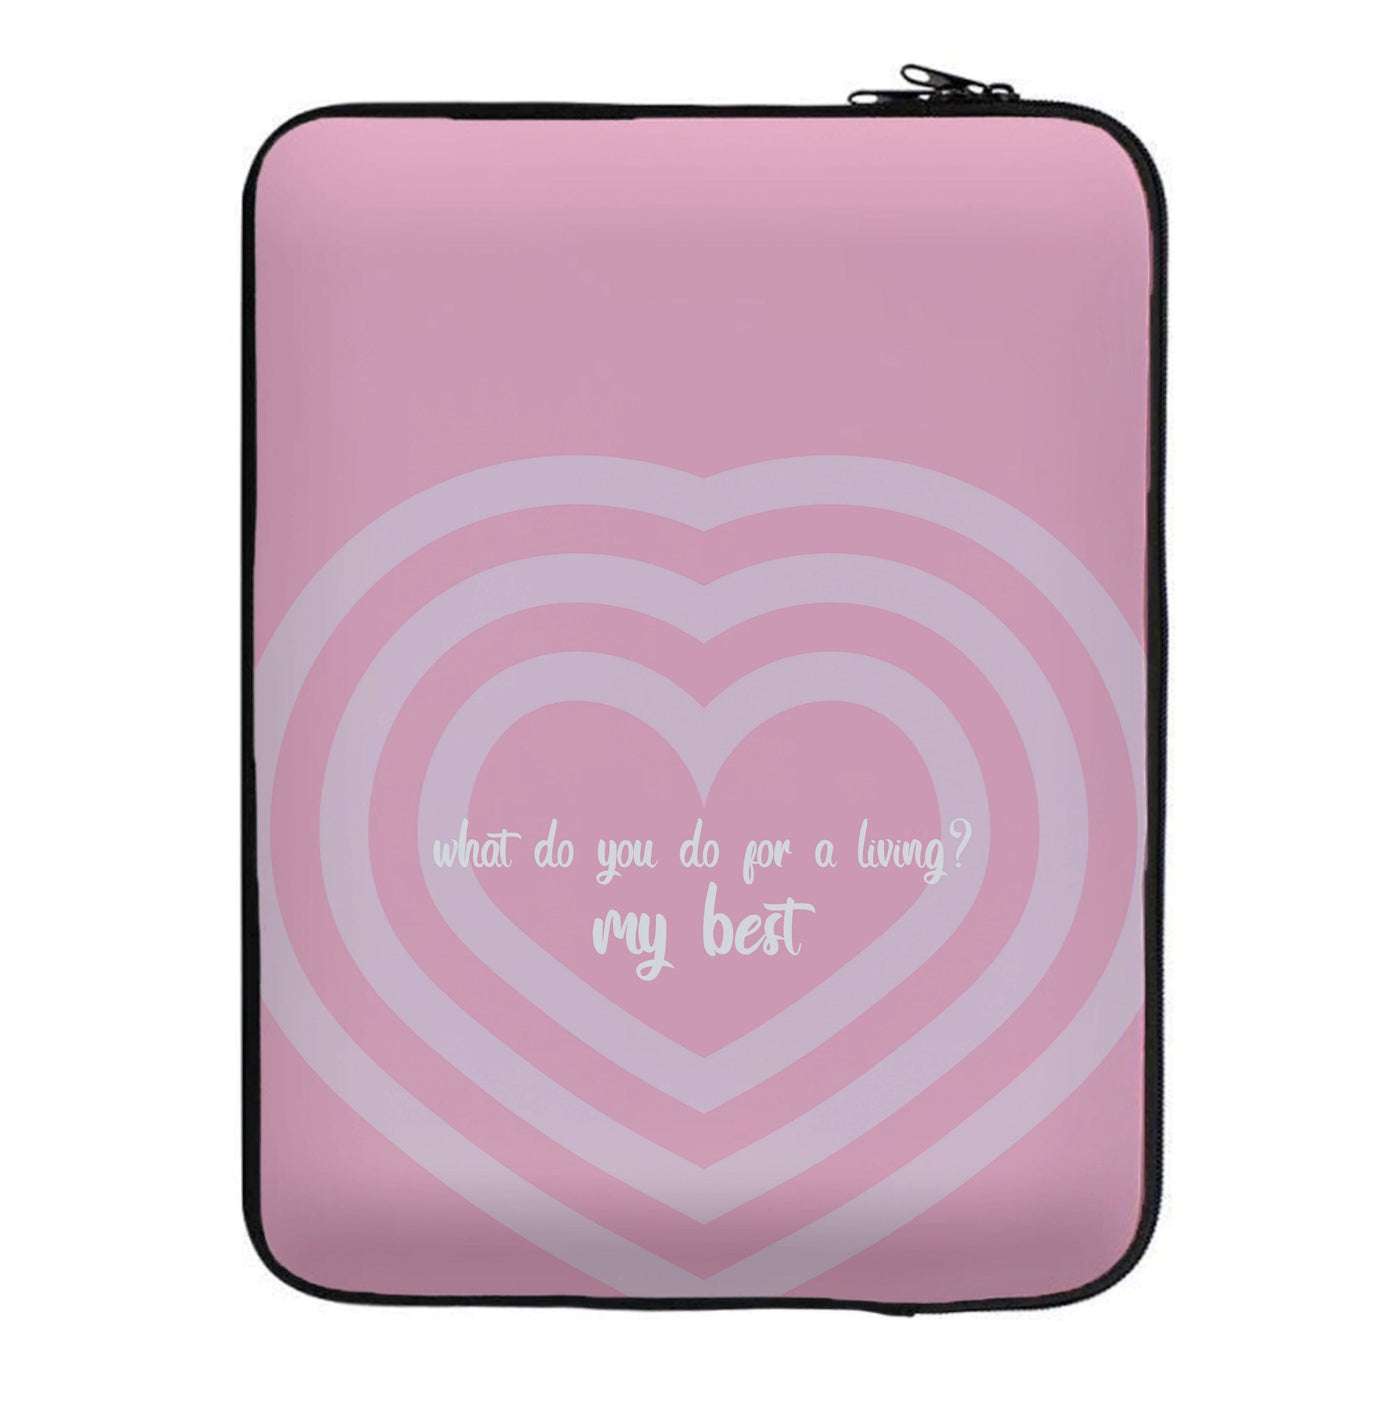 My Best - Funny Quotes Laptop Sleeve